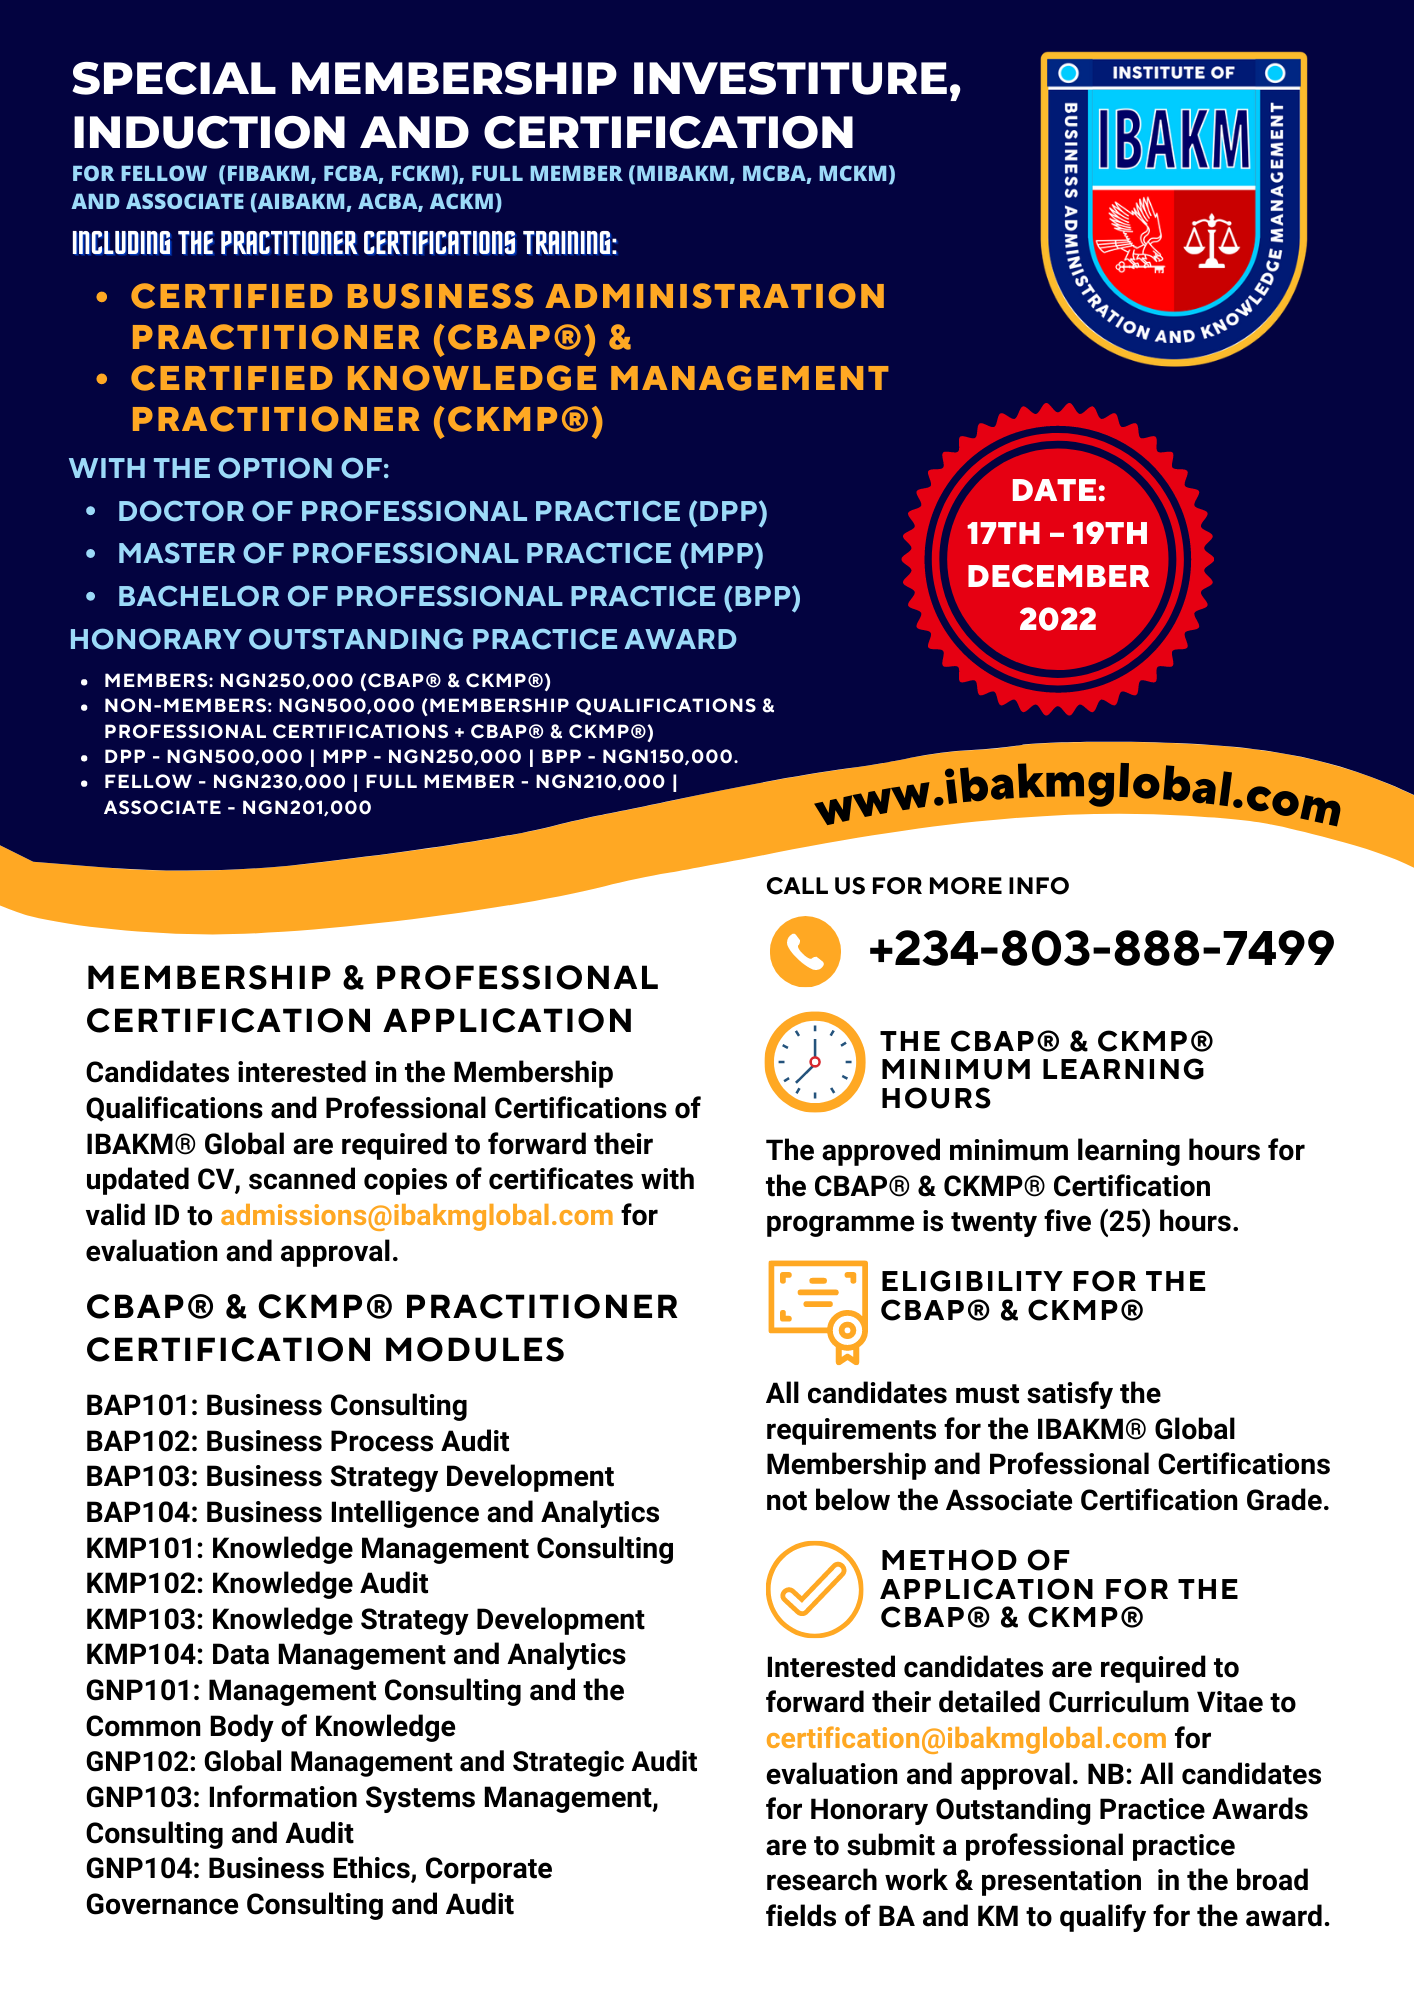 Special Membership Investiture, Induction and Certification/Practitioner Certifications Training